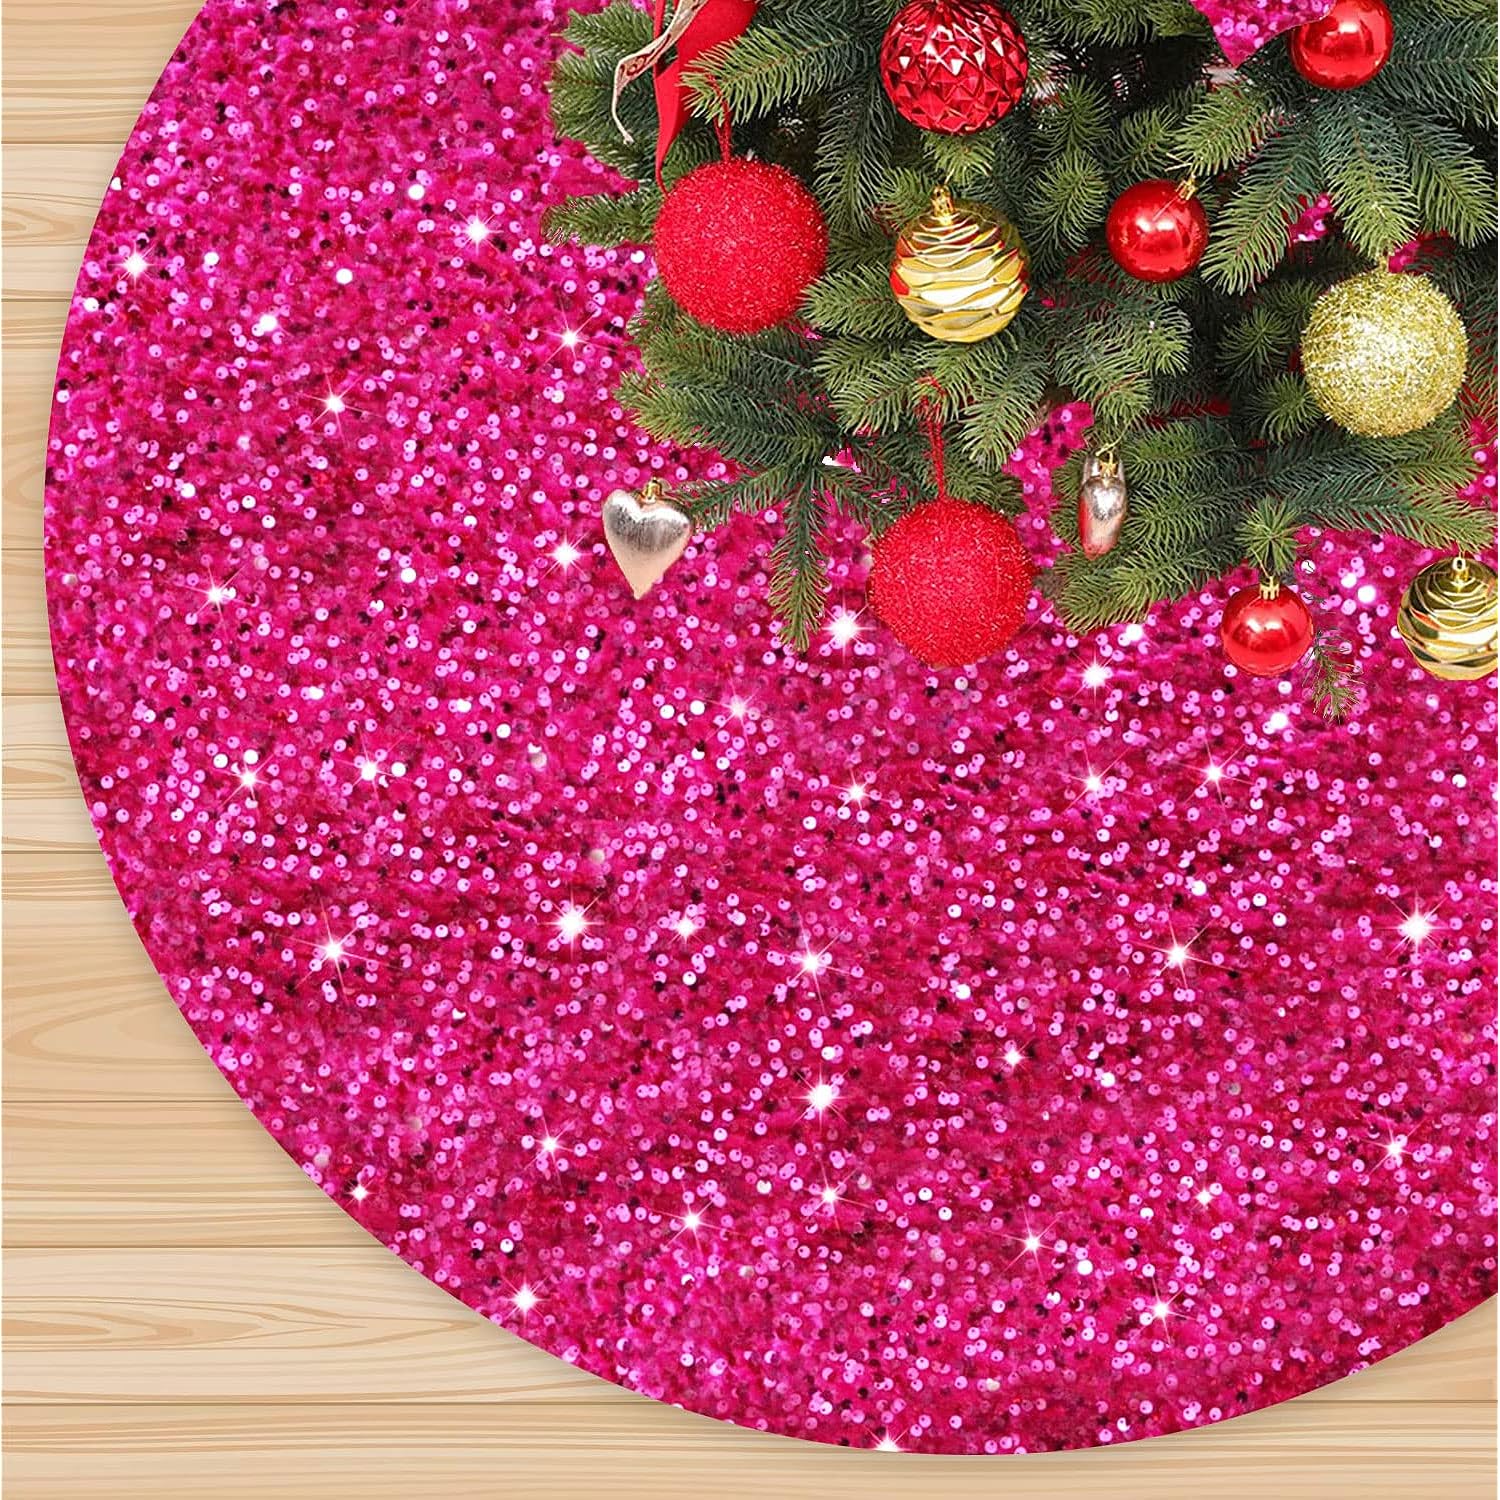 Great Choice Products Sequin Christmas Tree Skirt 36 Inch Velvet Tree Skirts For Halloween Christmas Decorations Vintage Tree Cover Skirt With Glit…